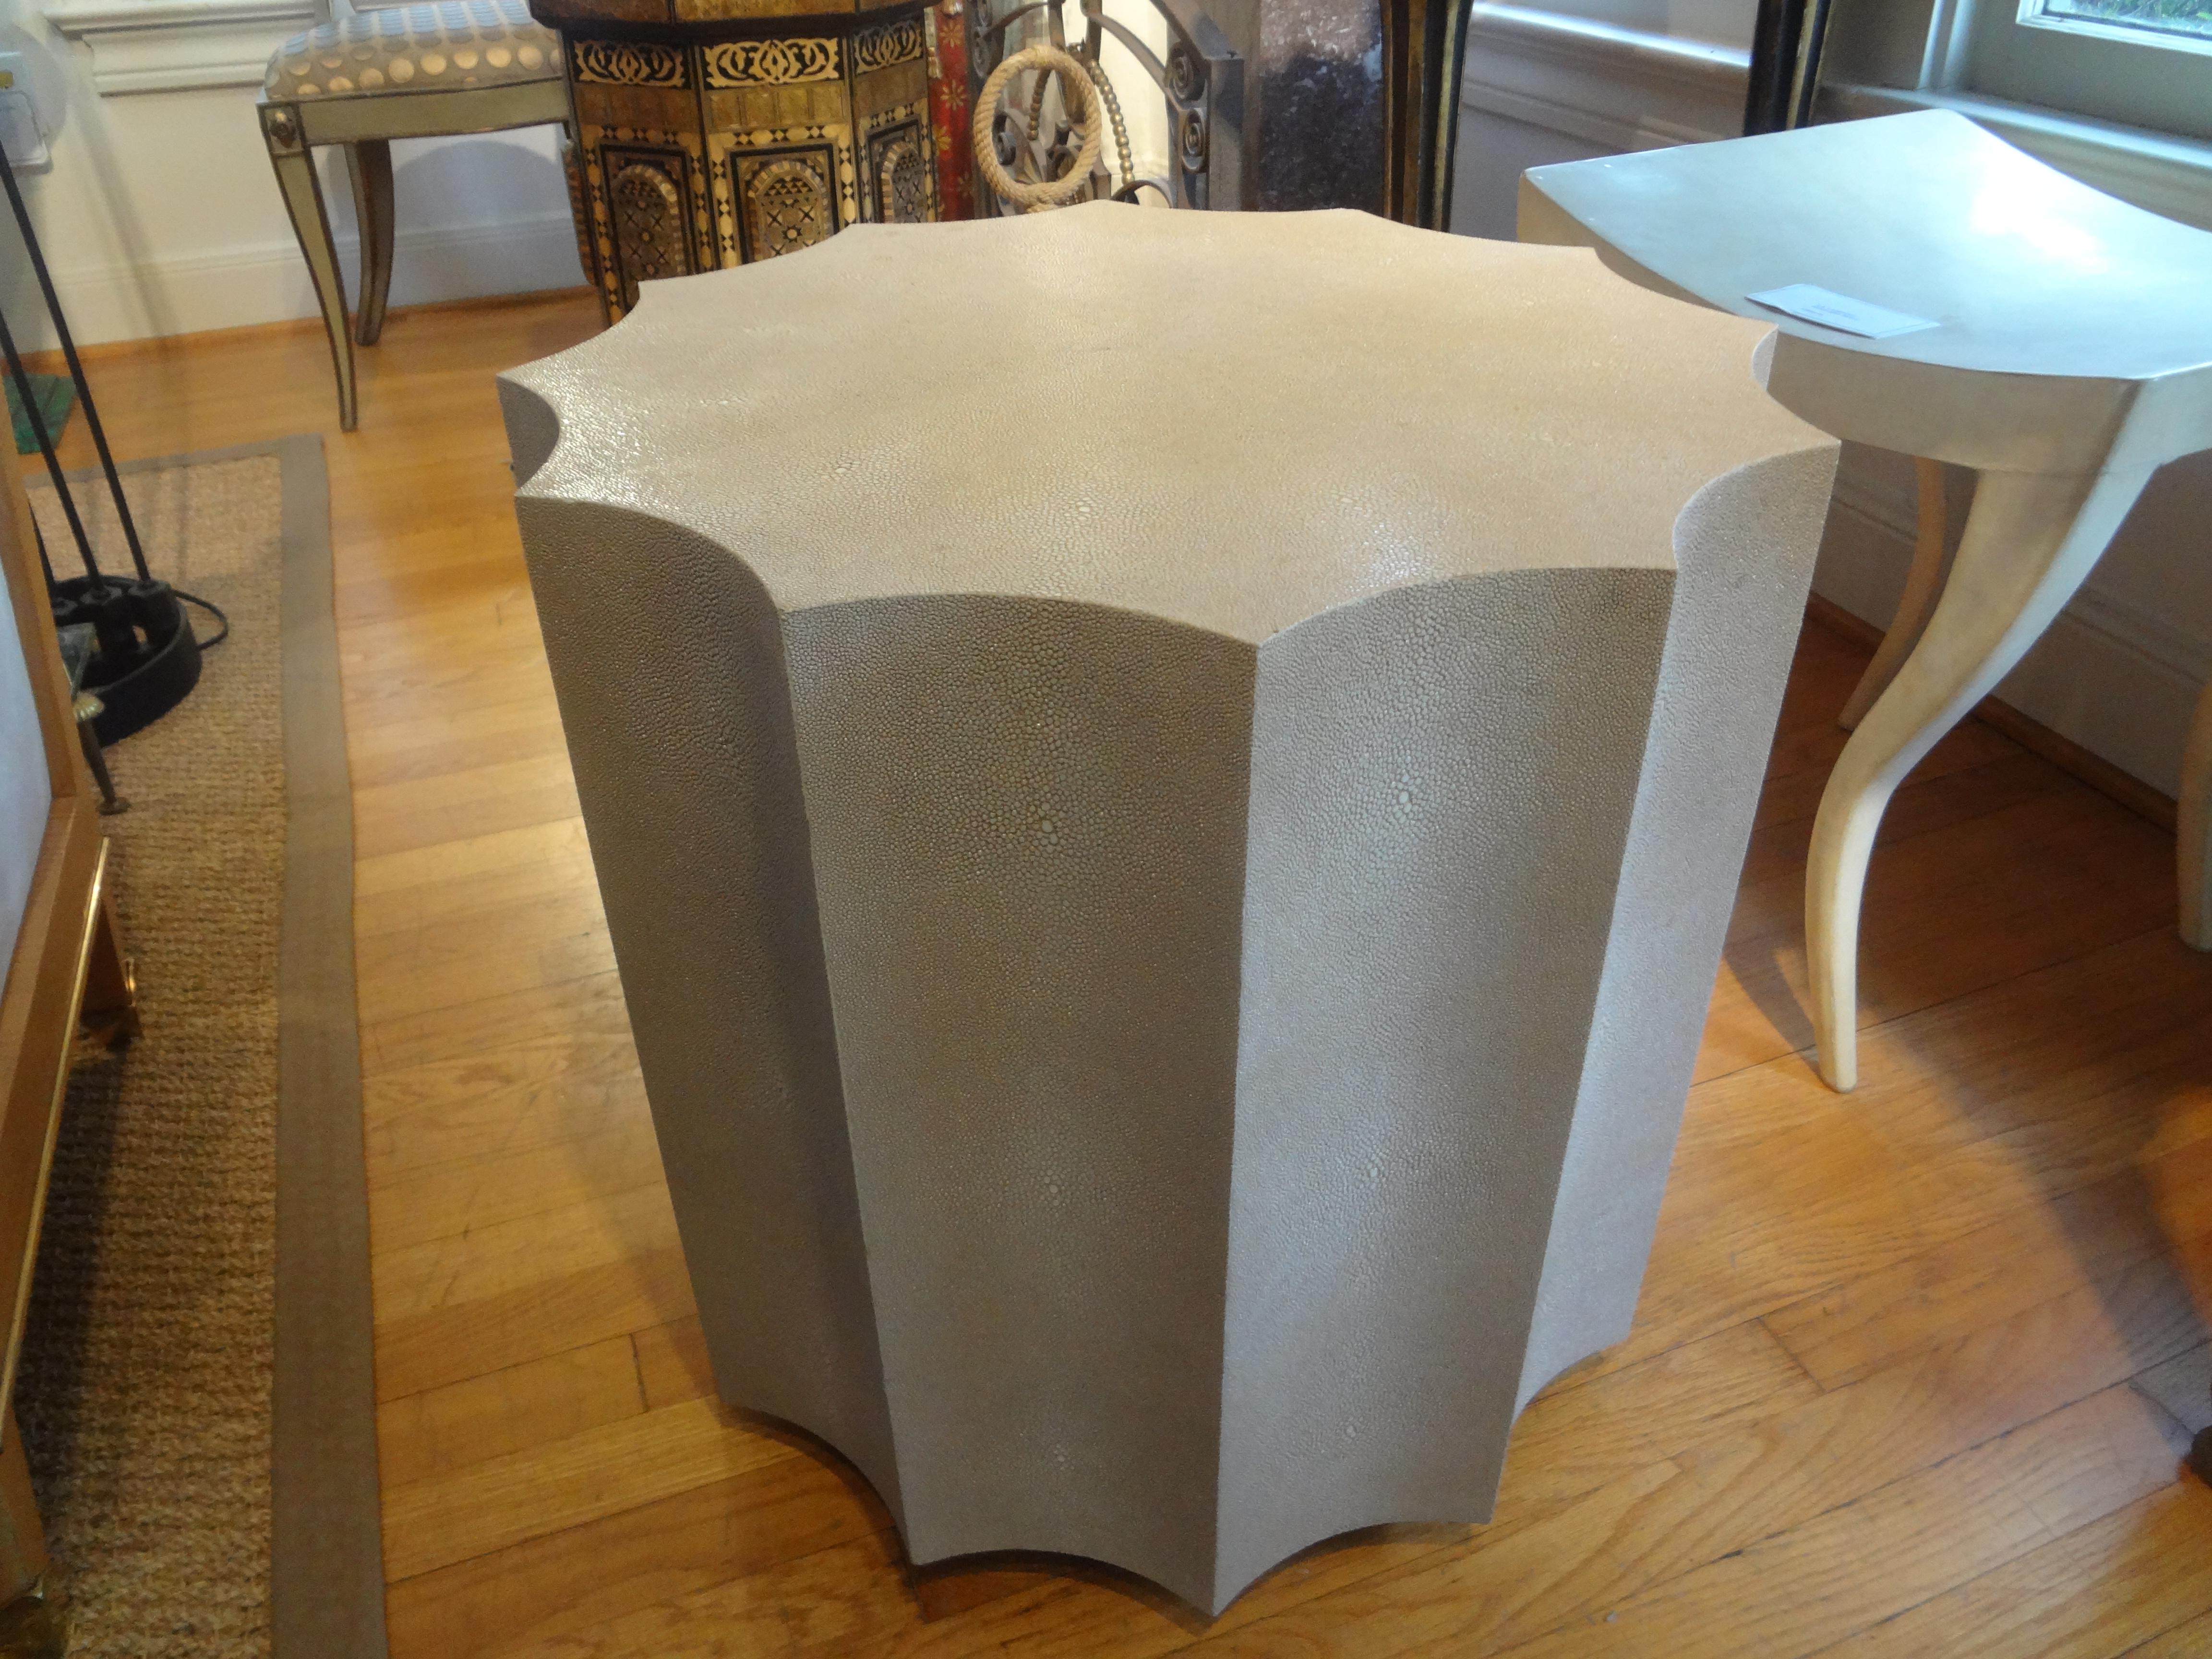 Vintage French Faux Stingray Table.
This great faux R & Y Augousti style stingray table, gueridon or side table is an interesting shape and was made with hidden casters for ease of movement.
Beautiful neutral color that would work well in a variety